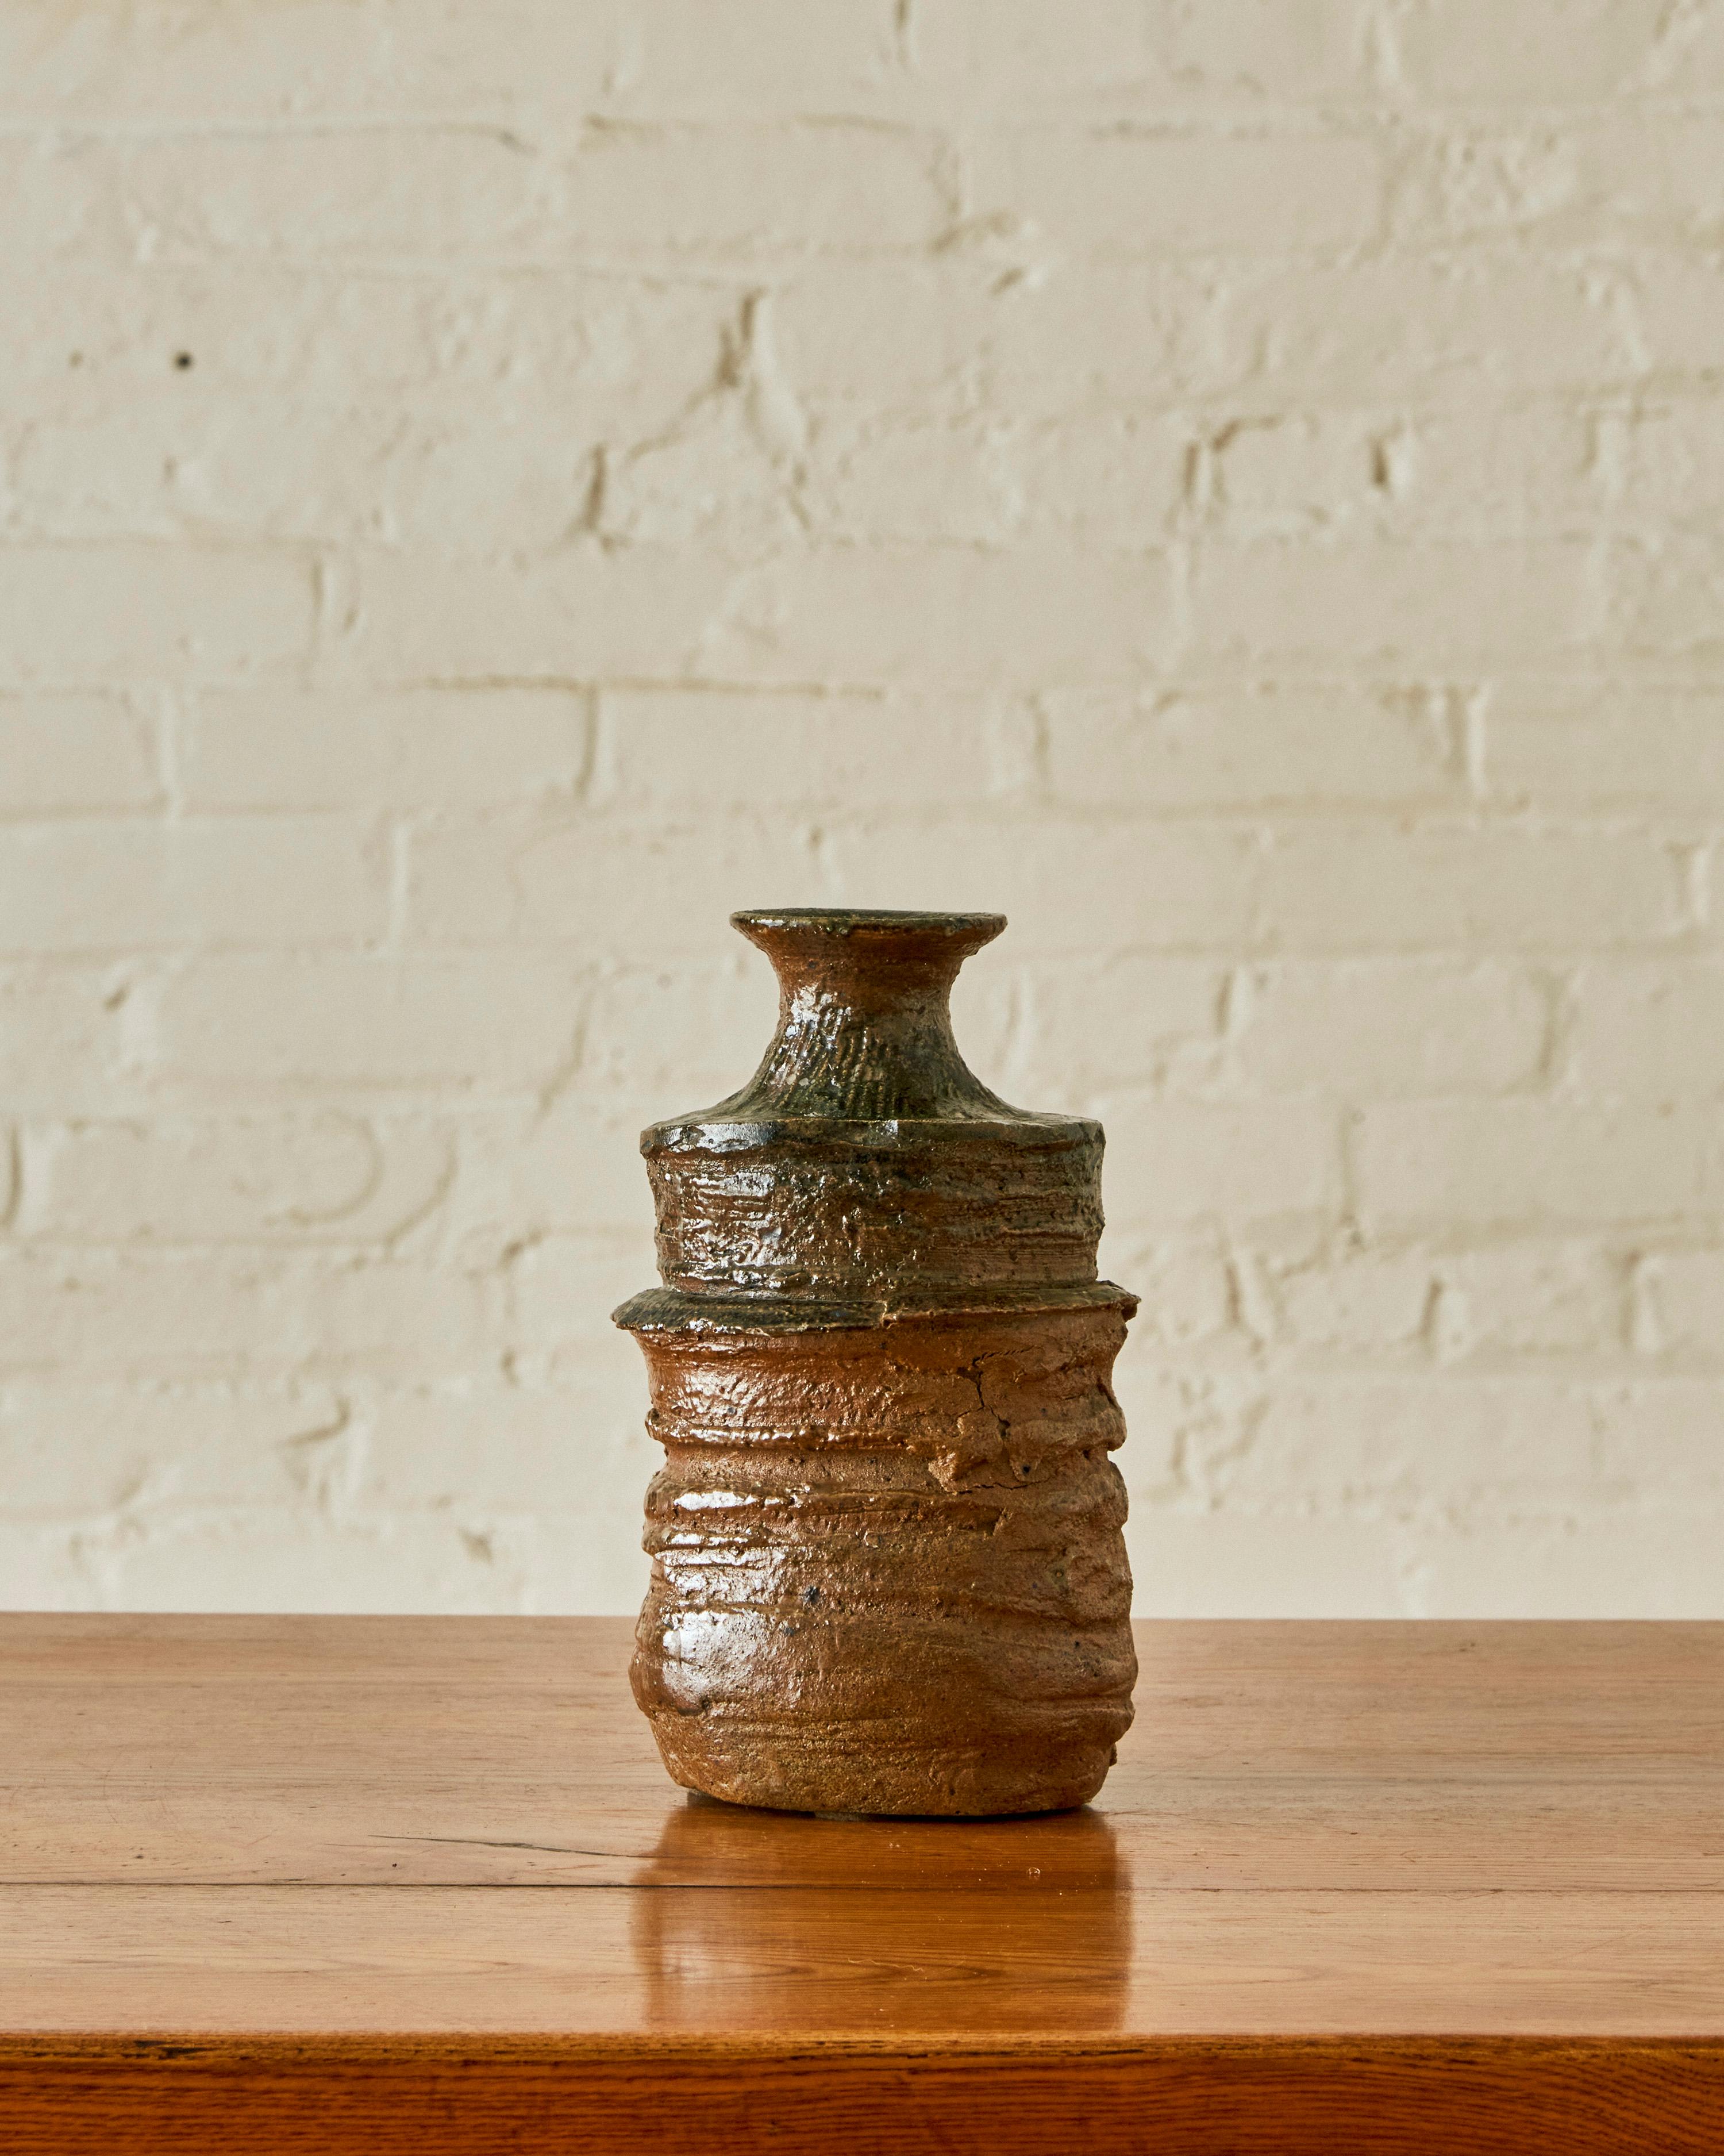 Ceramic Vase by Gerard Brossard with partially glazed, grooved body and flared neck. Signed on the underside.

